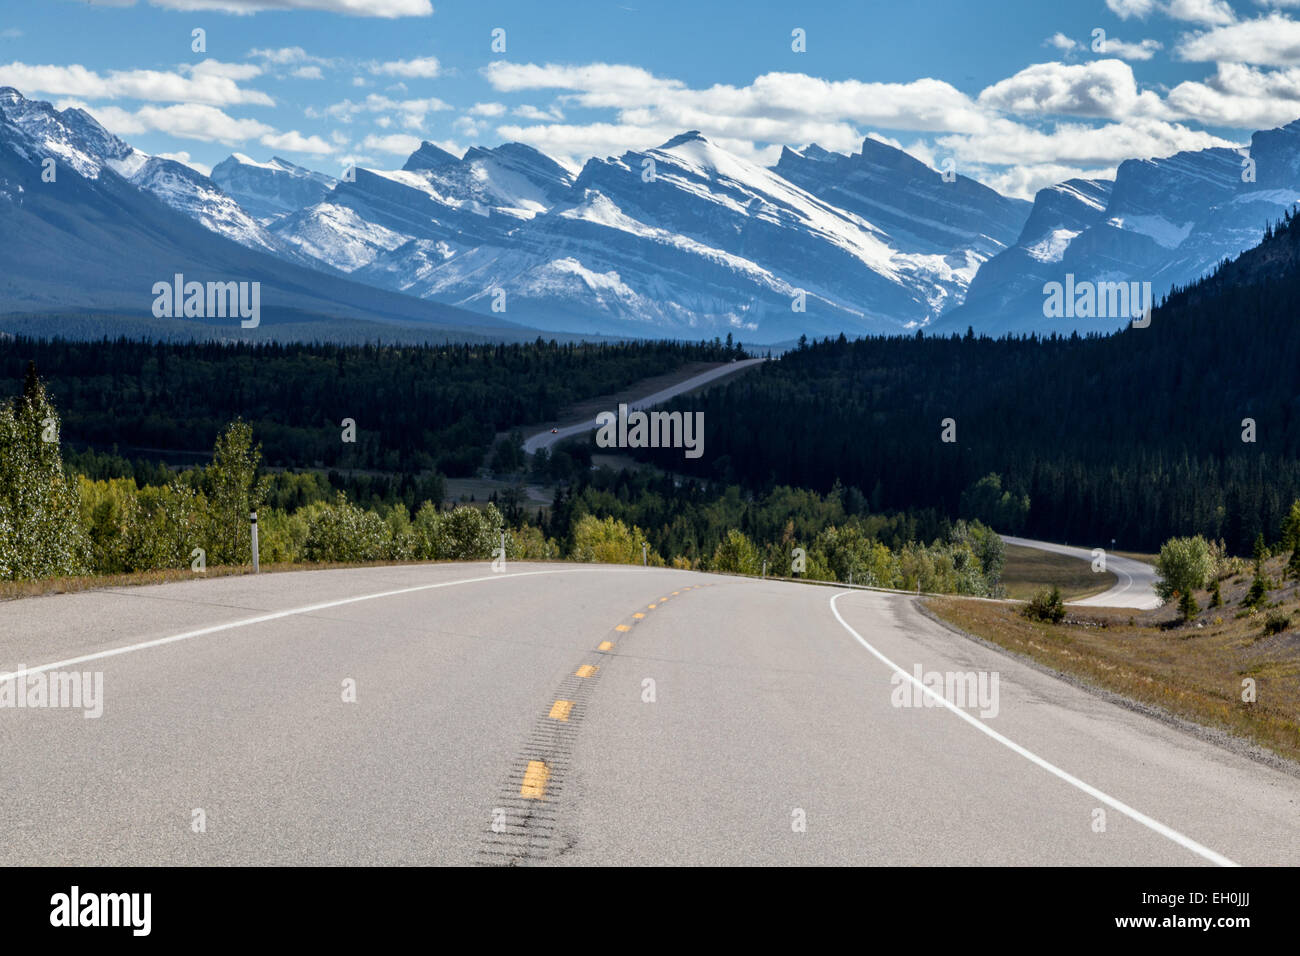 A two-lane paved Alberta David Thompson Highway #11 through the snow-covered Rocky Mountains, viewing of the beautiful landscape Stock Photo